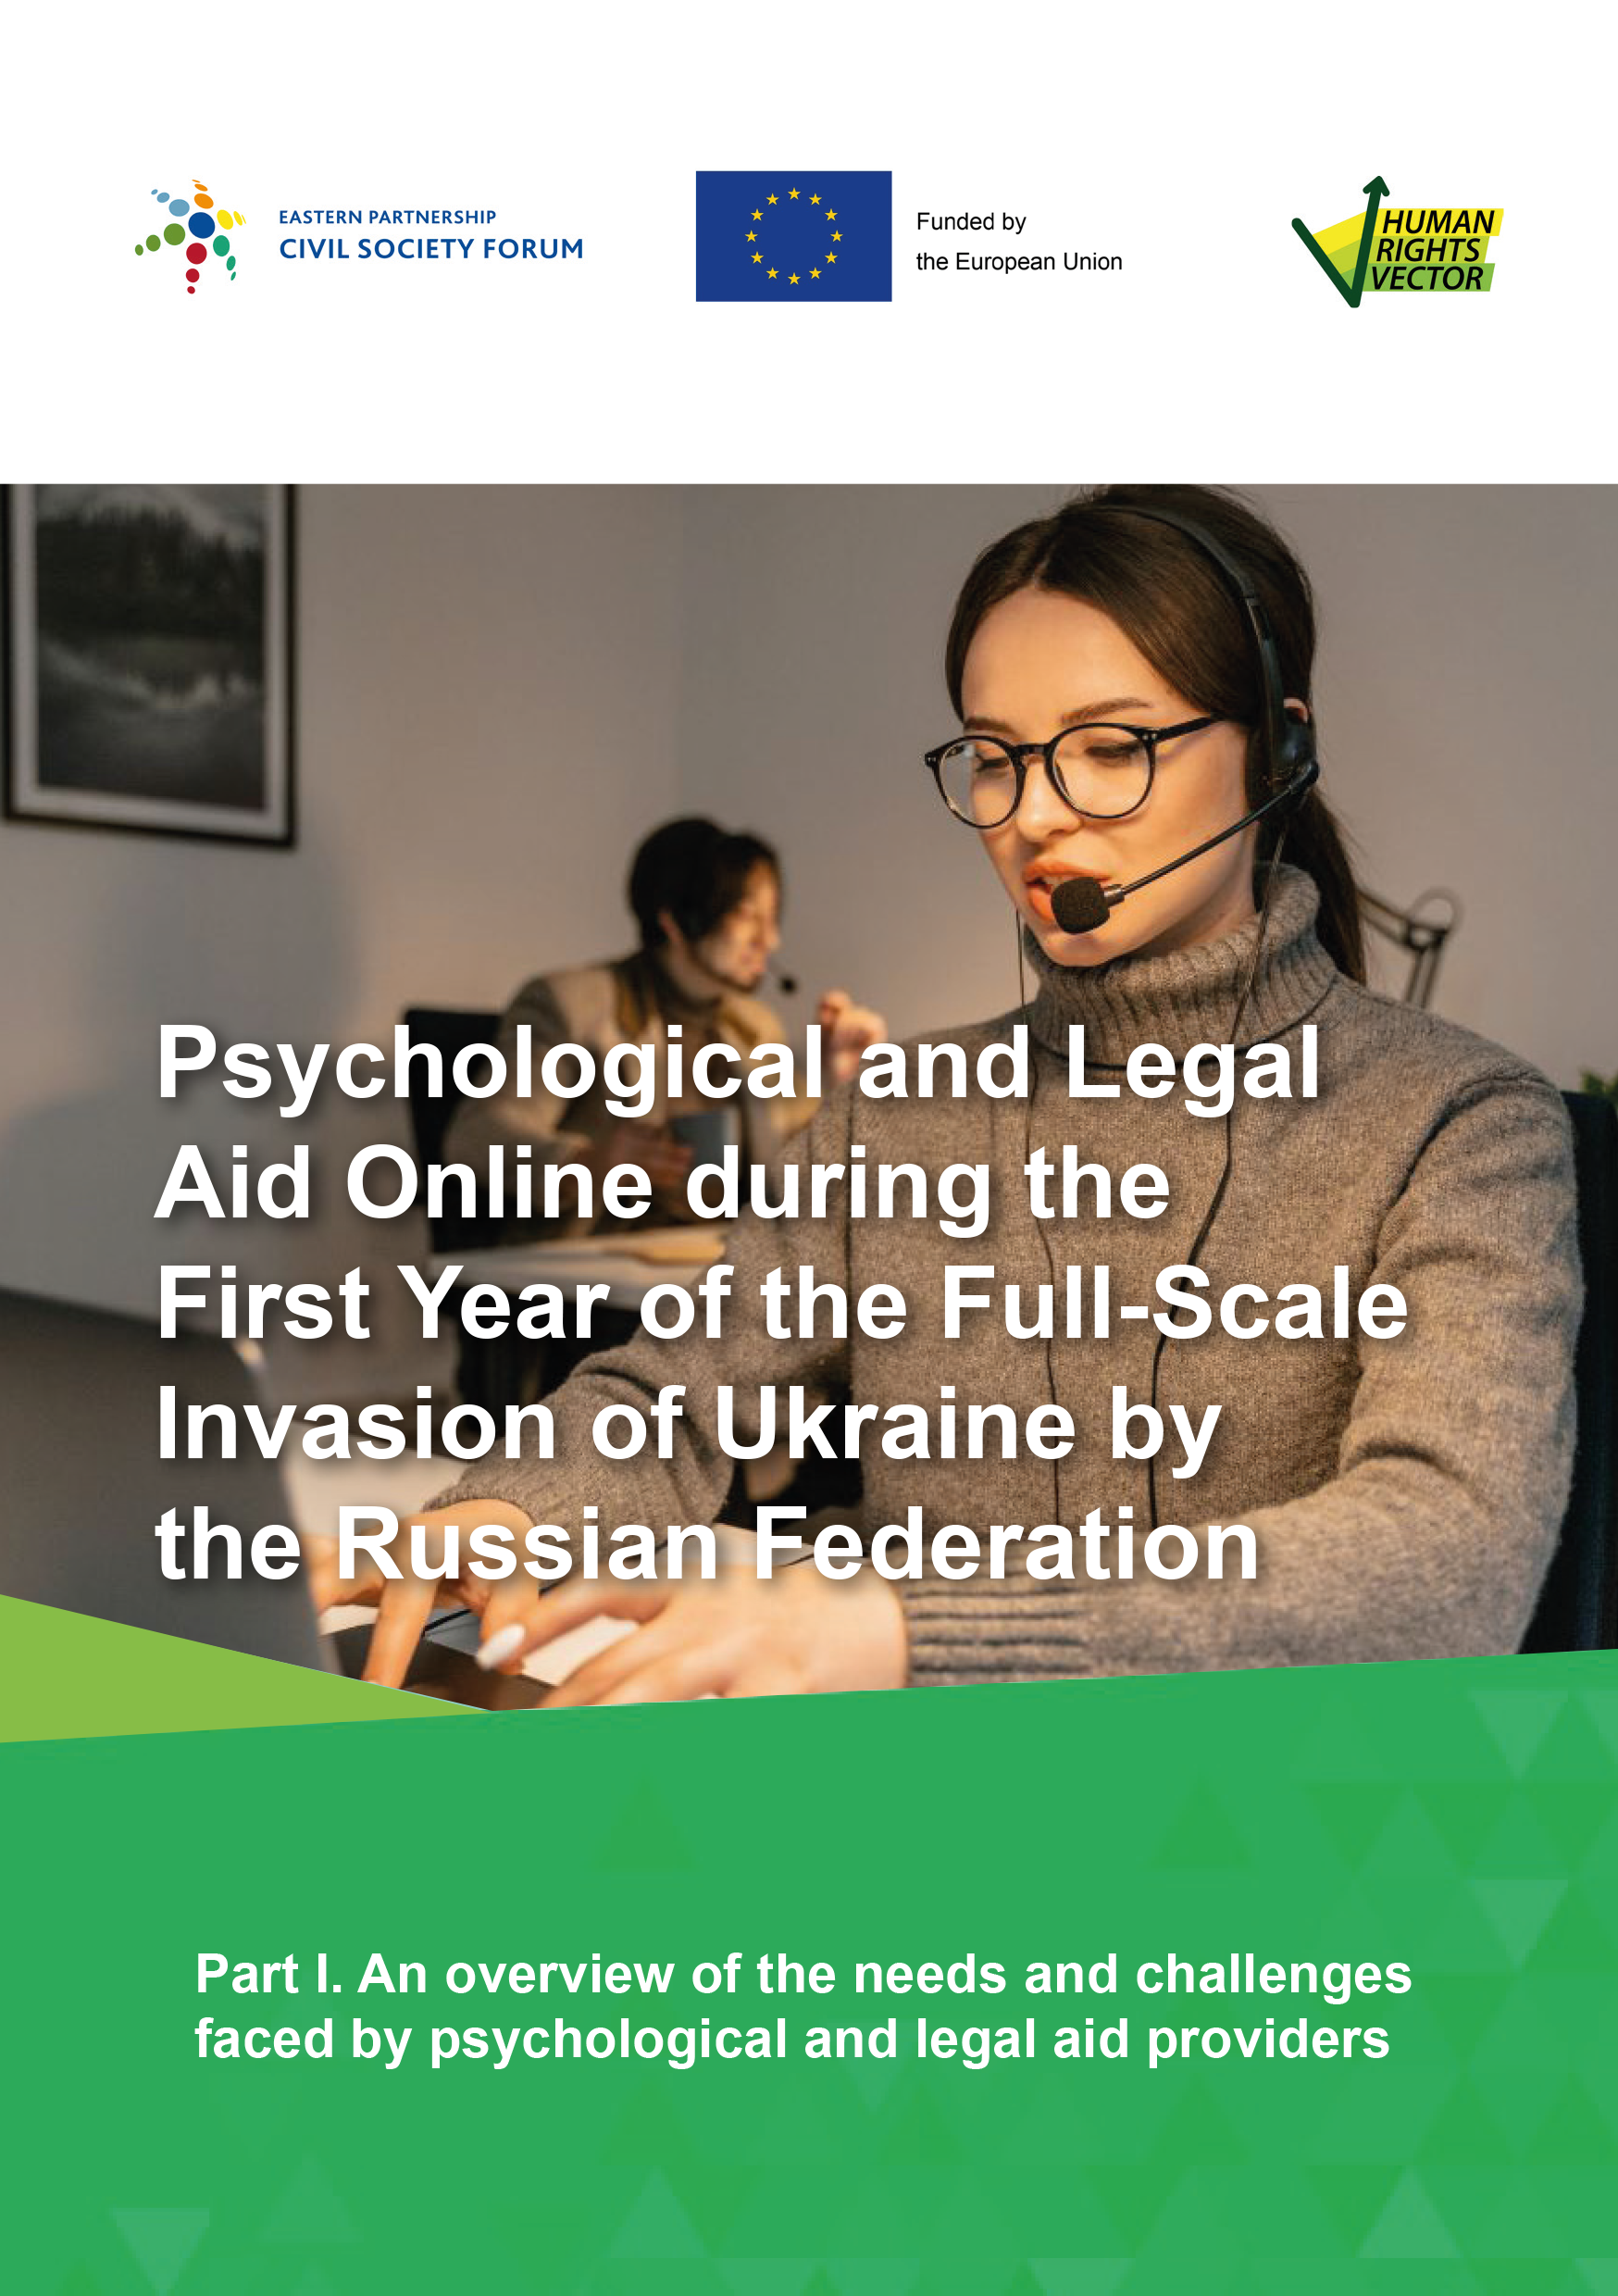 Psychological and Legal Aid Online during the First Year of the Full-Scale Invasion of Ukraine by the Russian Federation. An overview of the needs and challenges faced by psychological and legal aid providers. Part 1